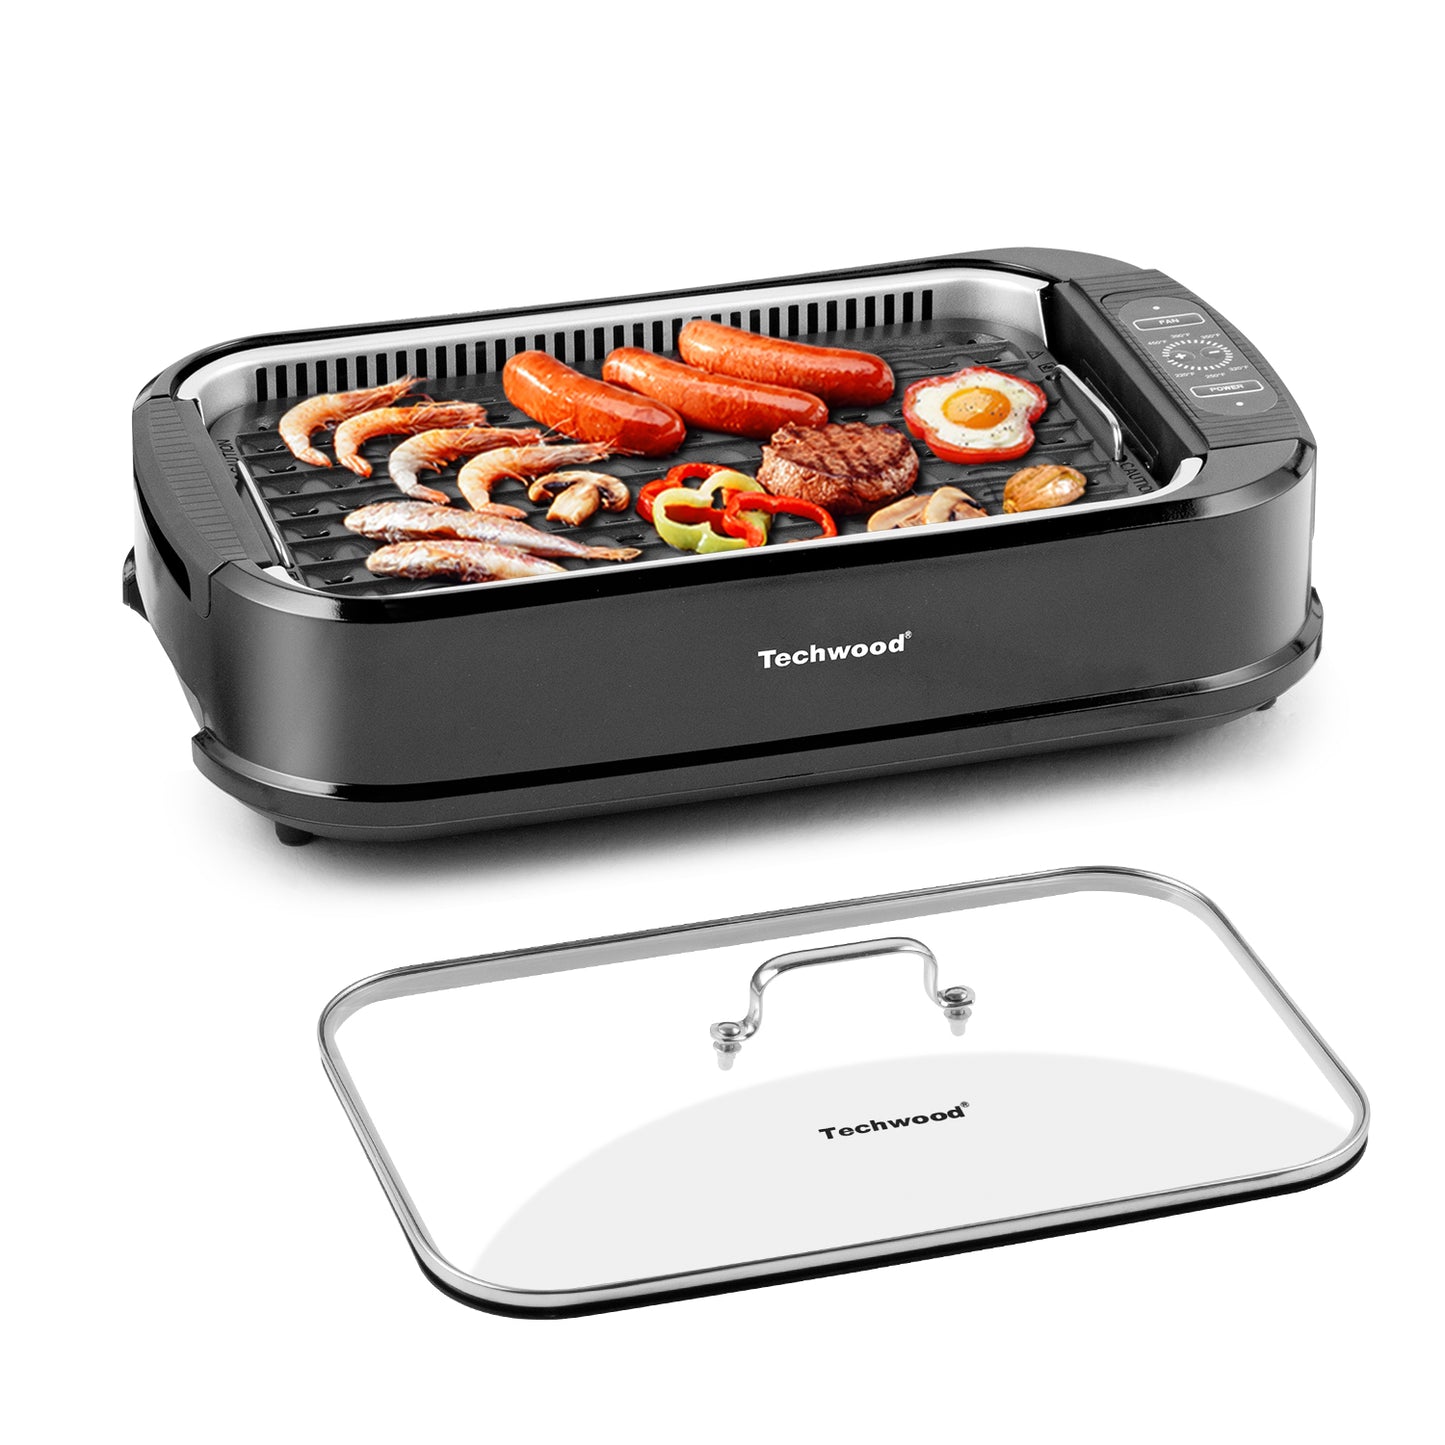 Indoor Grill, Techwood 1500W Smokeless Electric Grill with 2 in1 Nonstick  Grill/Griddle Plates, Portable Korean BBQ Grill with 6-Level Control, Glass